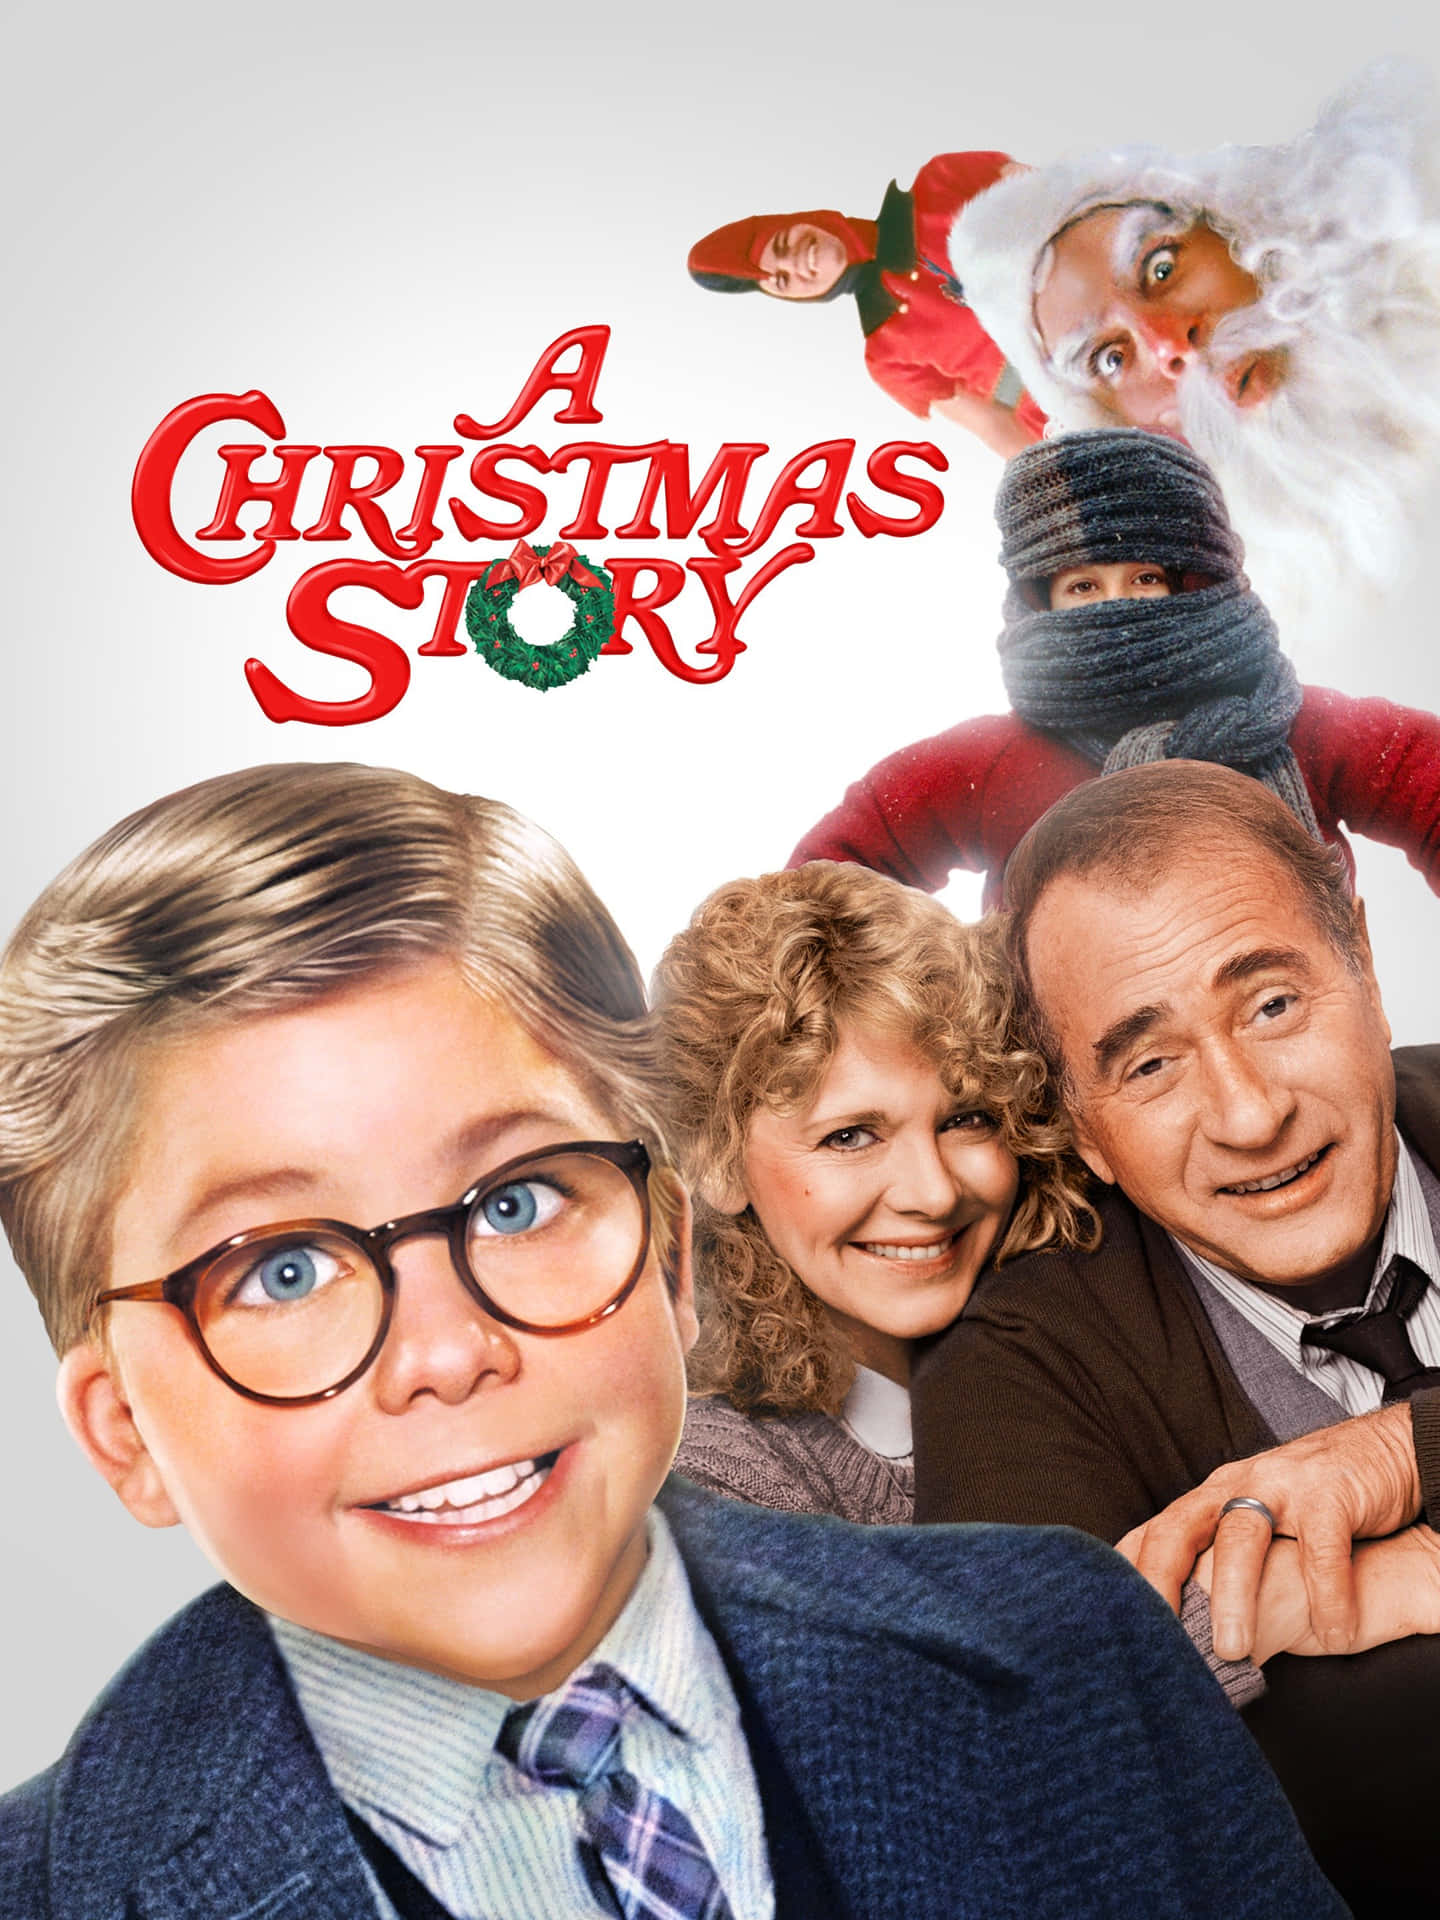 A Christmas Story Character Poster Wallpaper